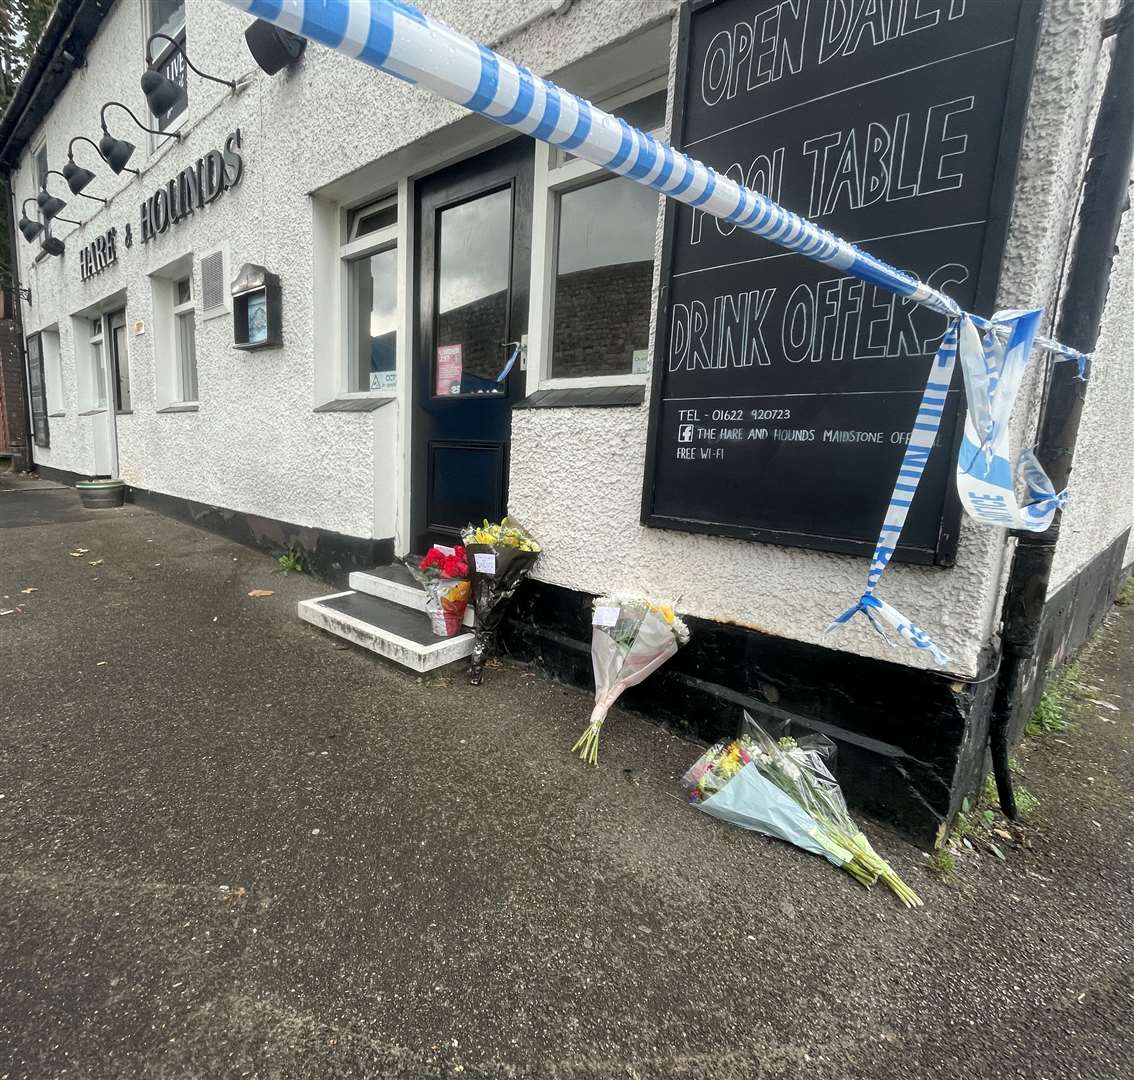 Tributes were left to Matthew Bryant after the fatal stabbing